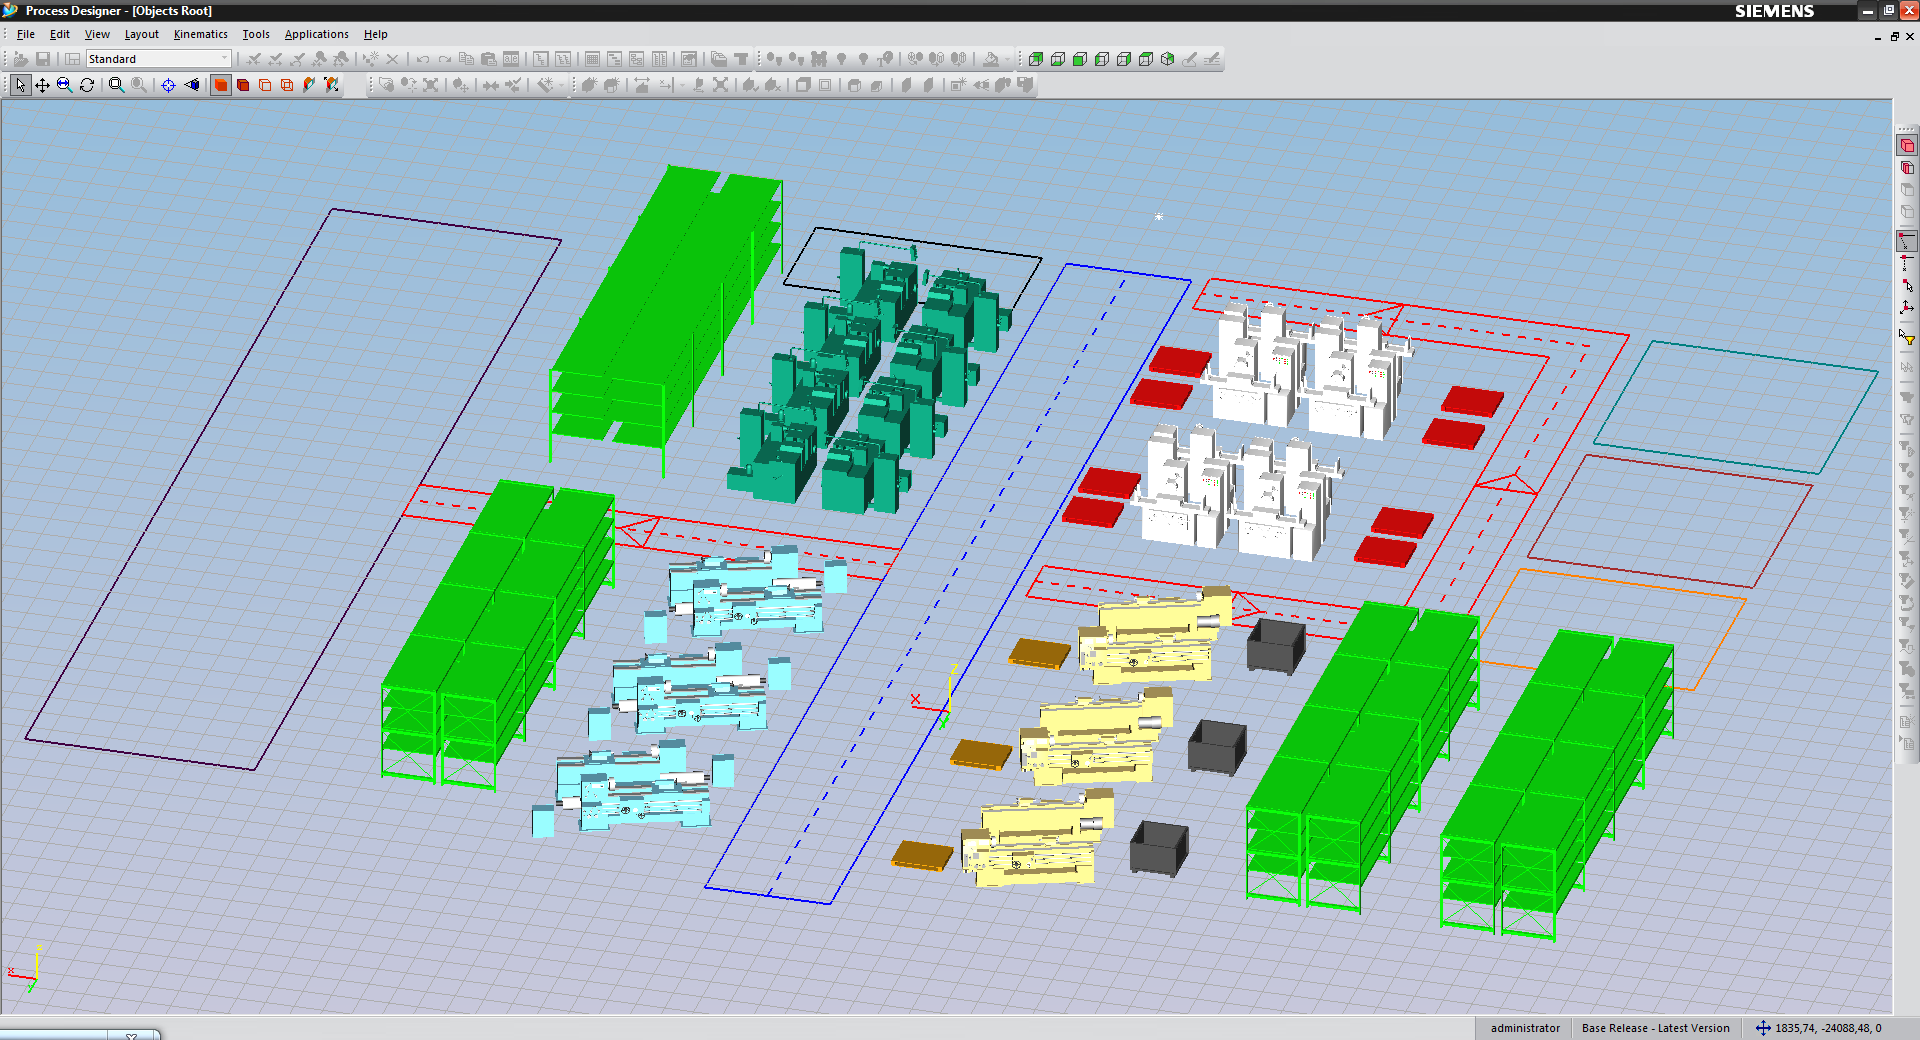 figure-3-3d-layout-of-production-system-with-logistics-areas-and-tracks